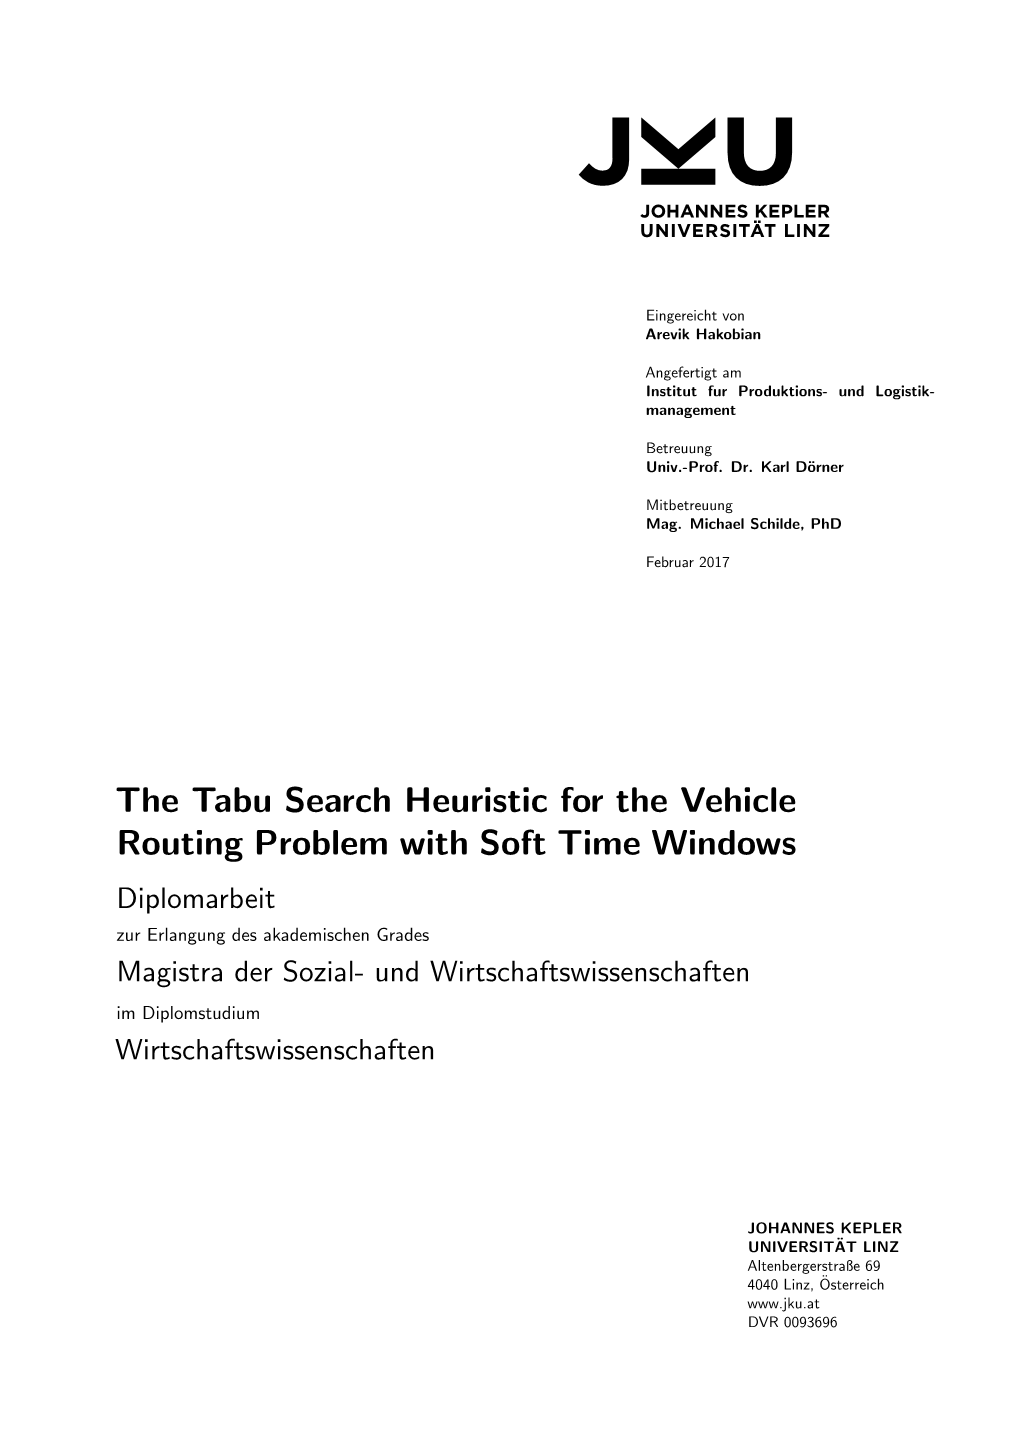 The Tabu Search Heuristic for the Vehicle Routing Problem with Soft